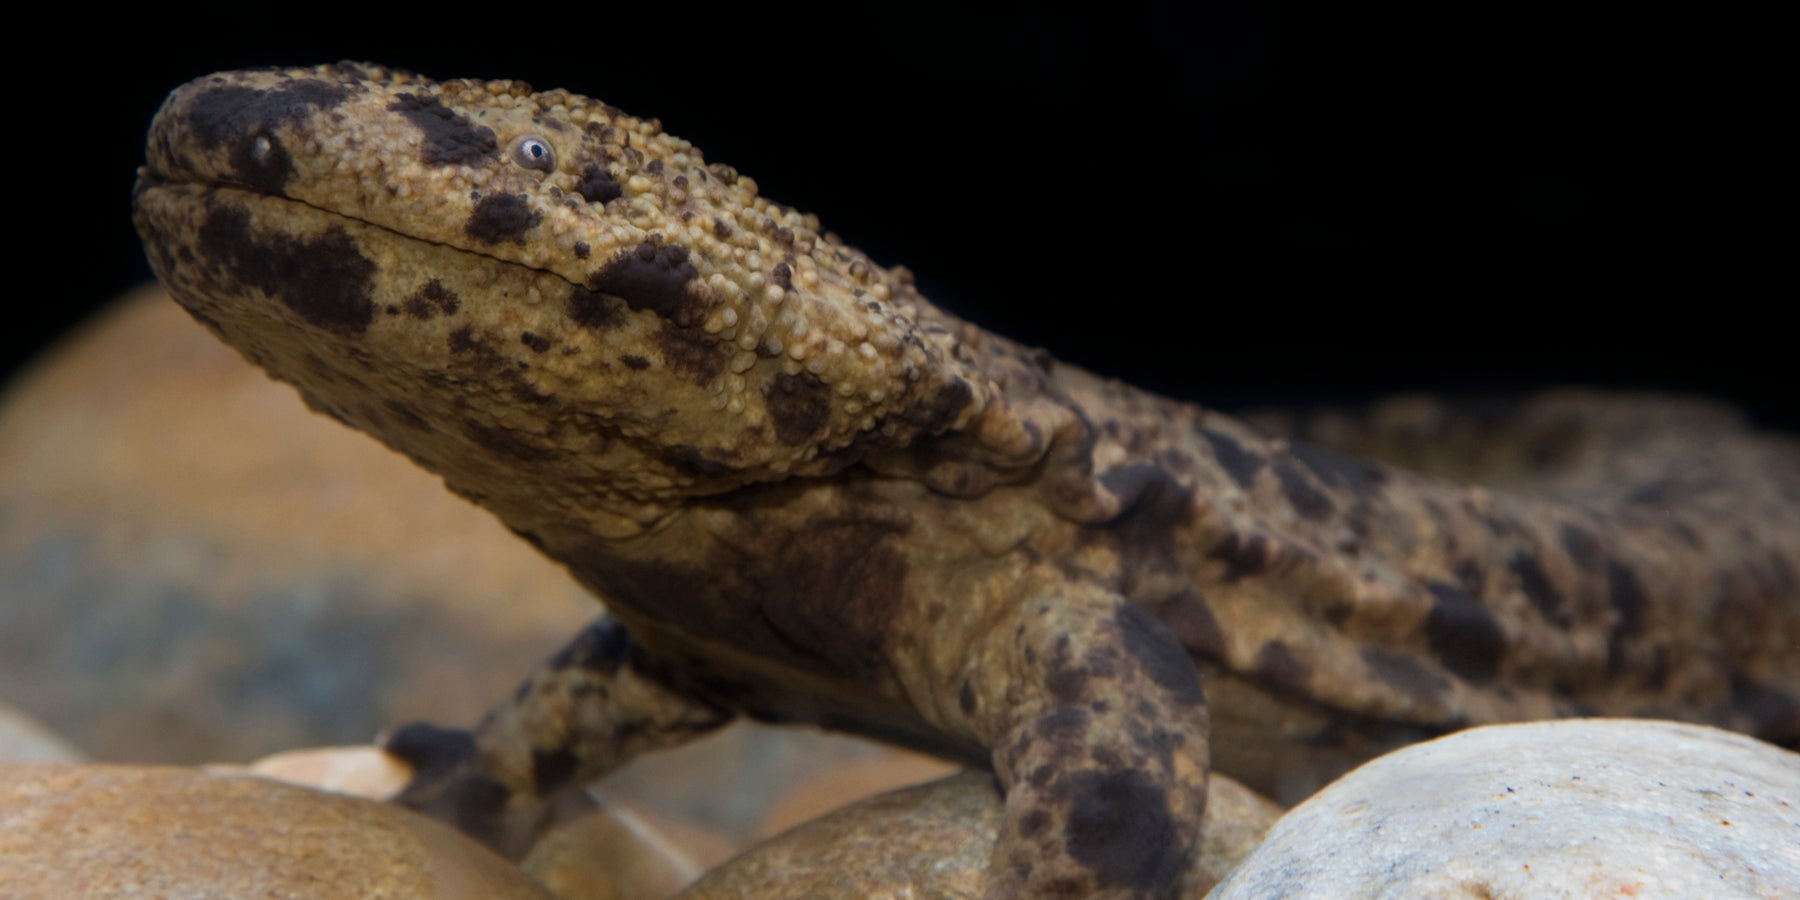 Japanese giant salamander at the Reptile Discovery Center